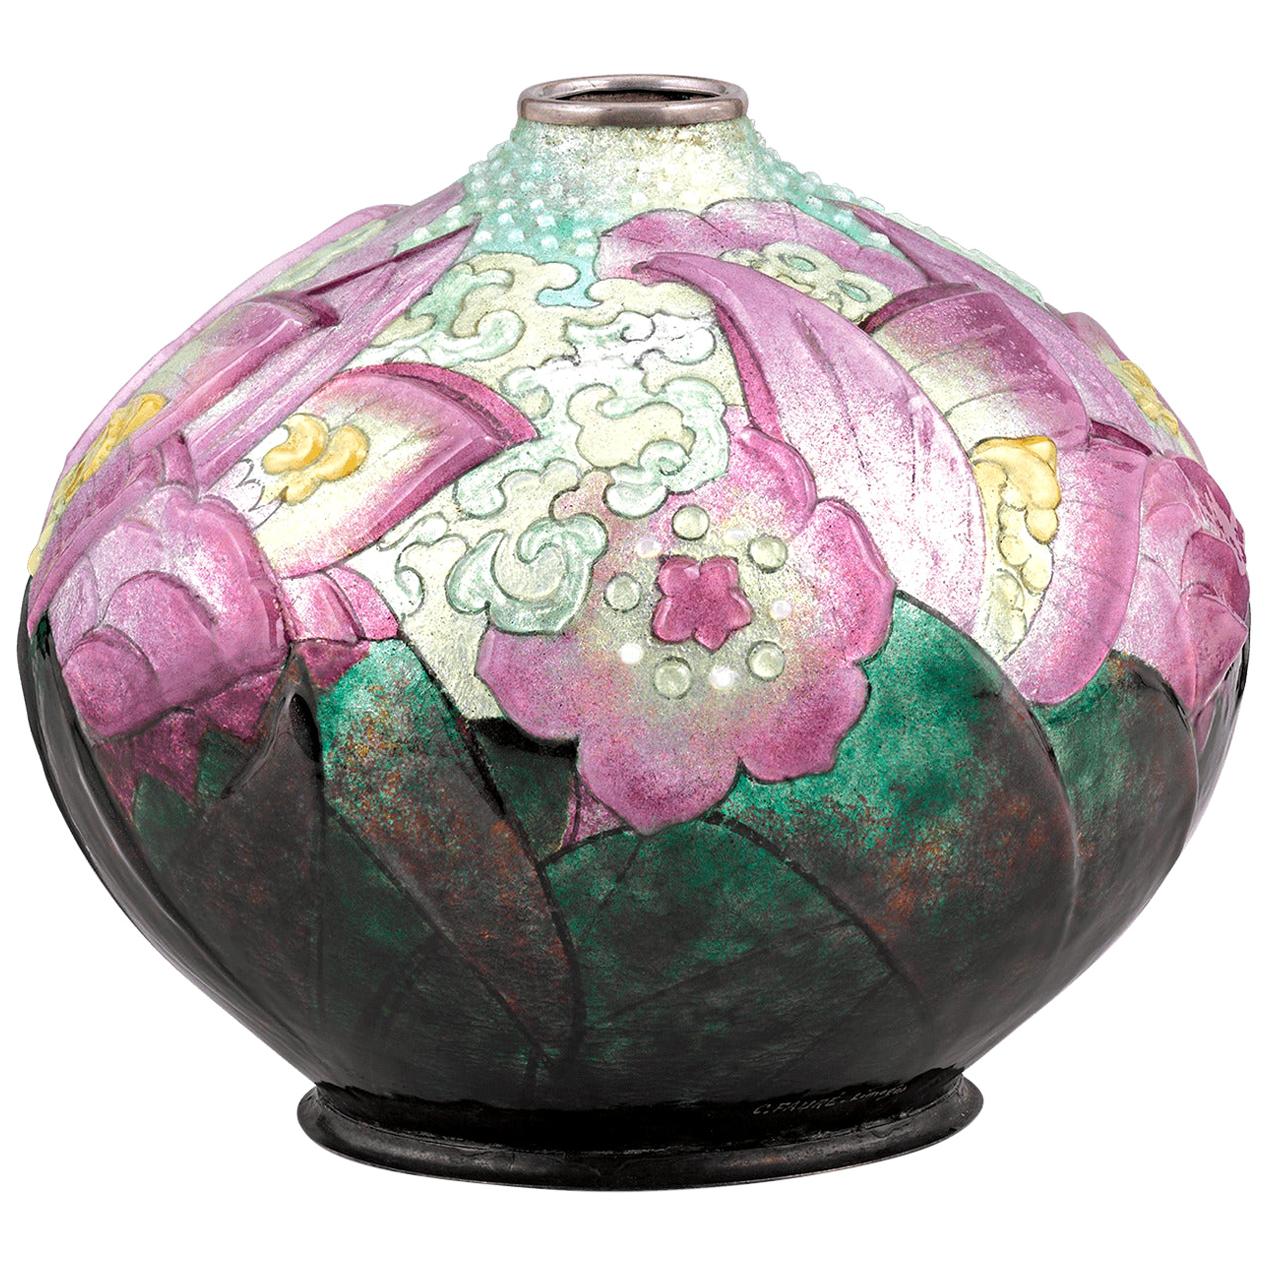 Lily Enamel Vase by Camille Fauré